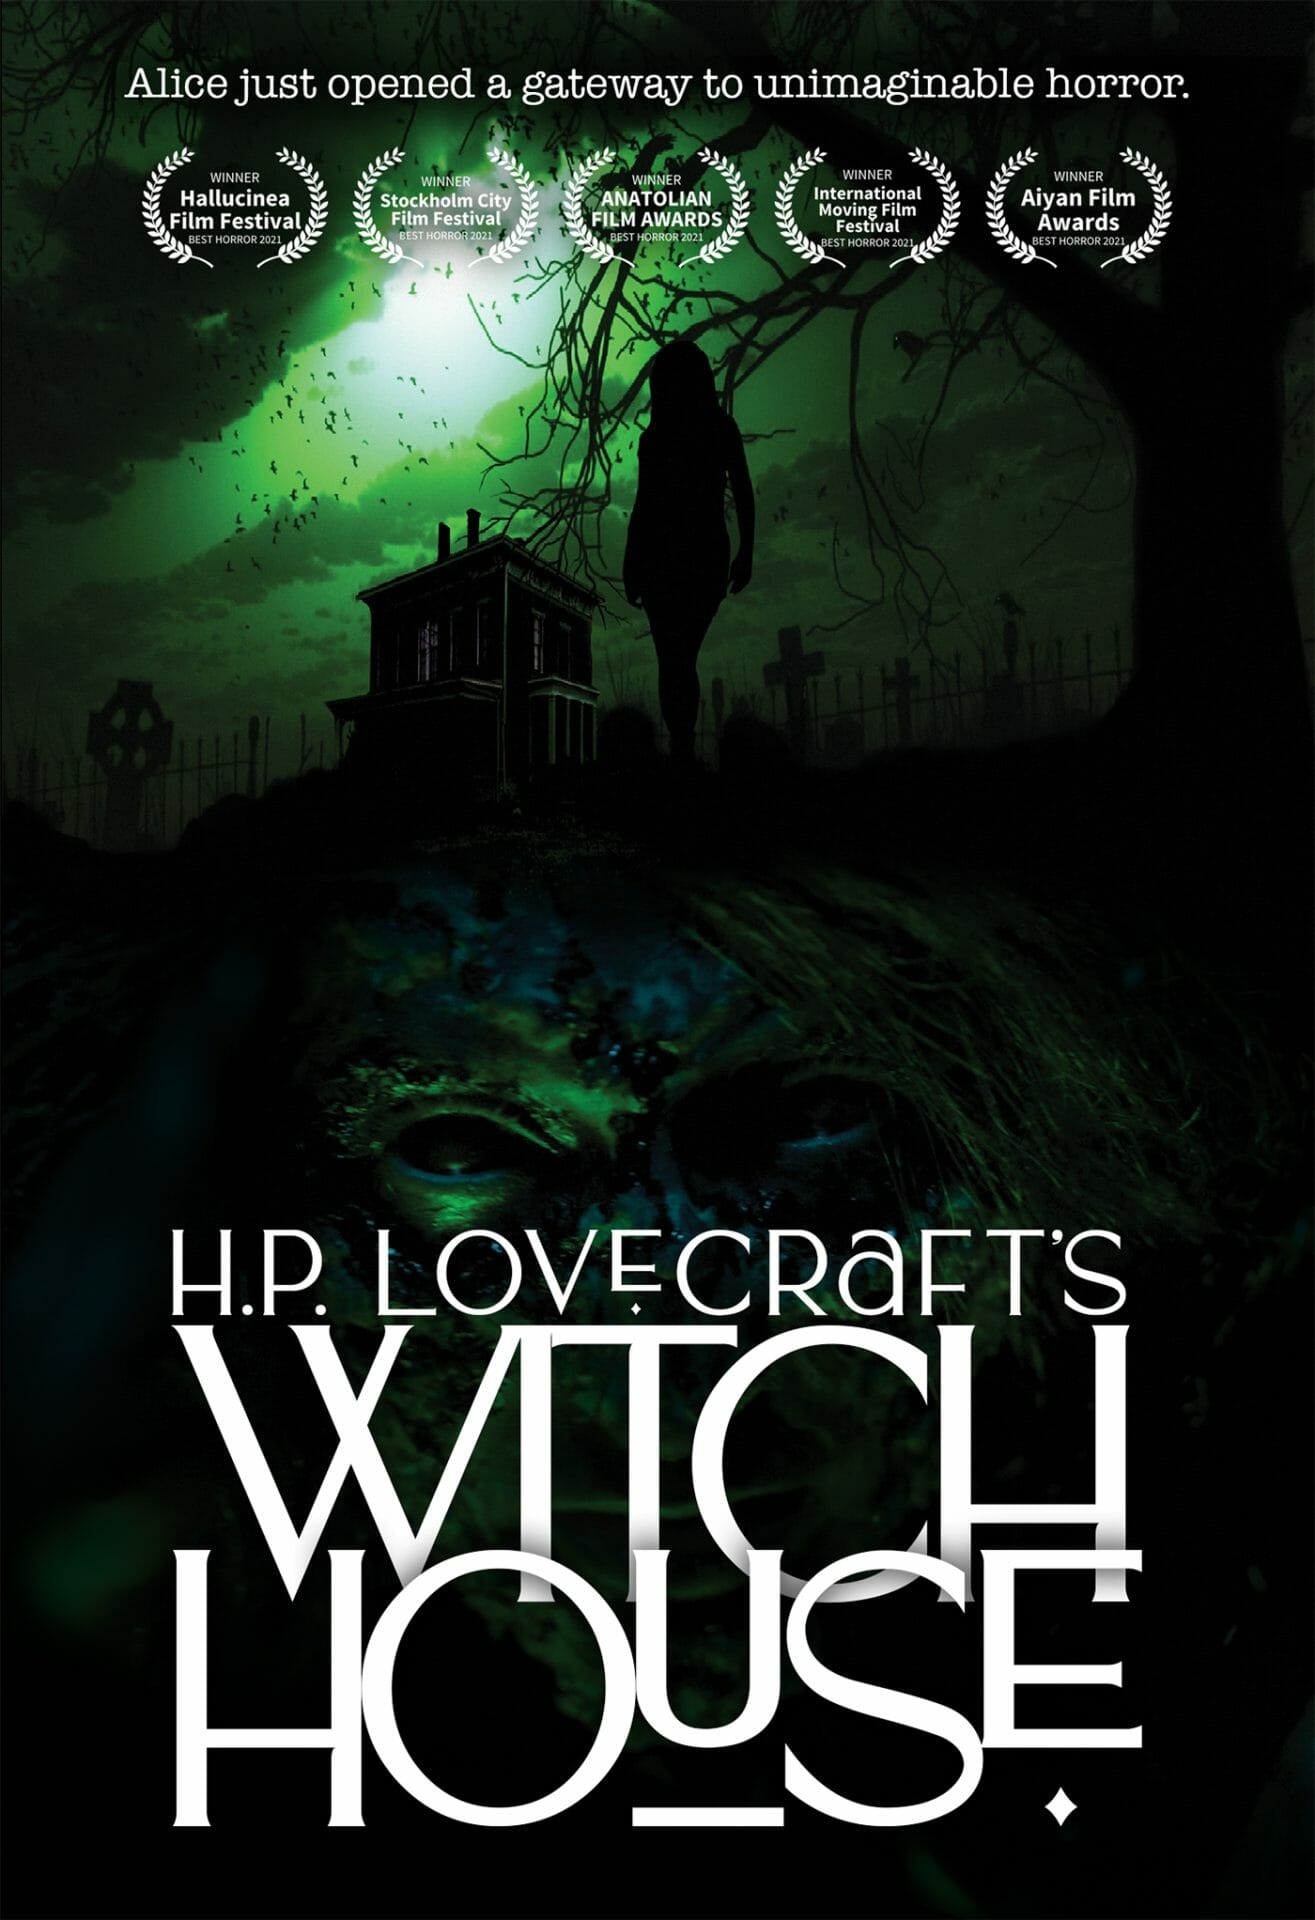 HP Lovecraft's Witch House DVD (NTSC Region 1)